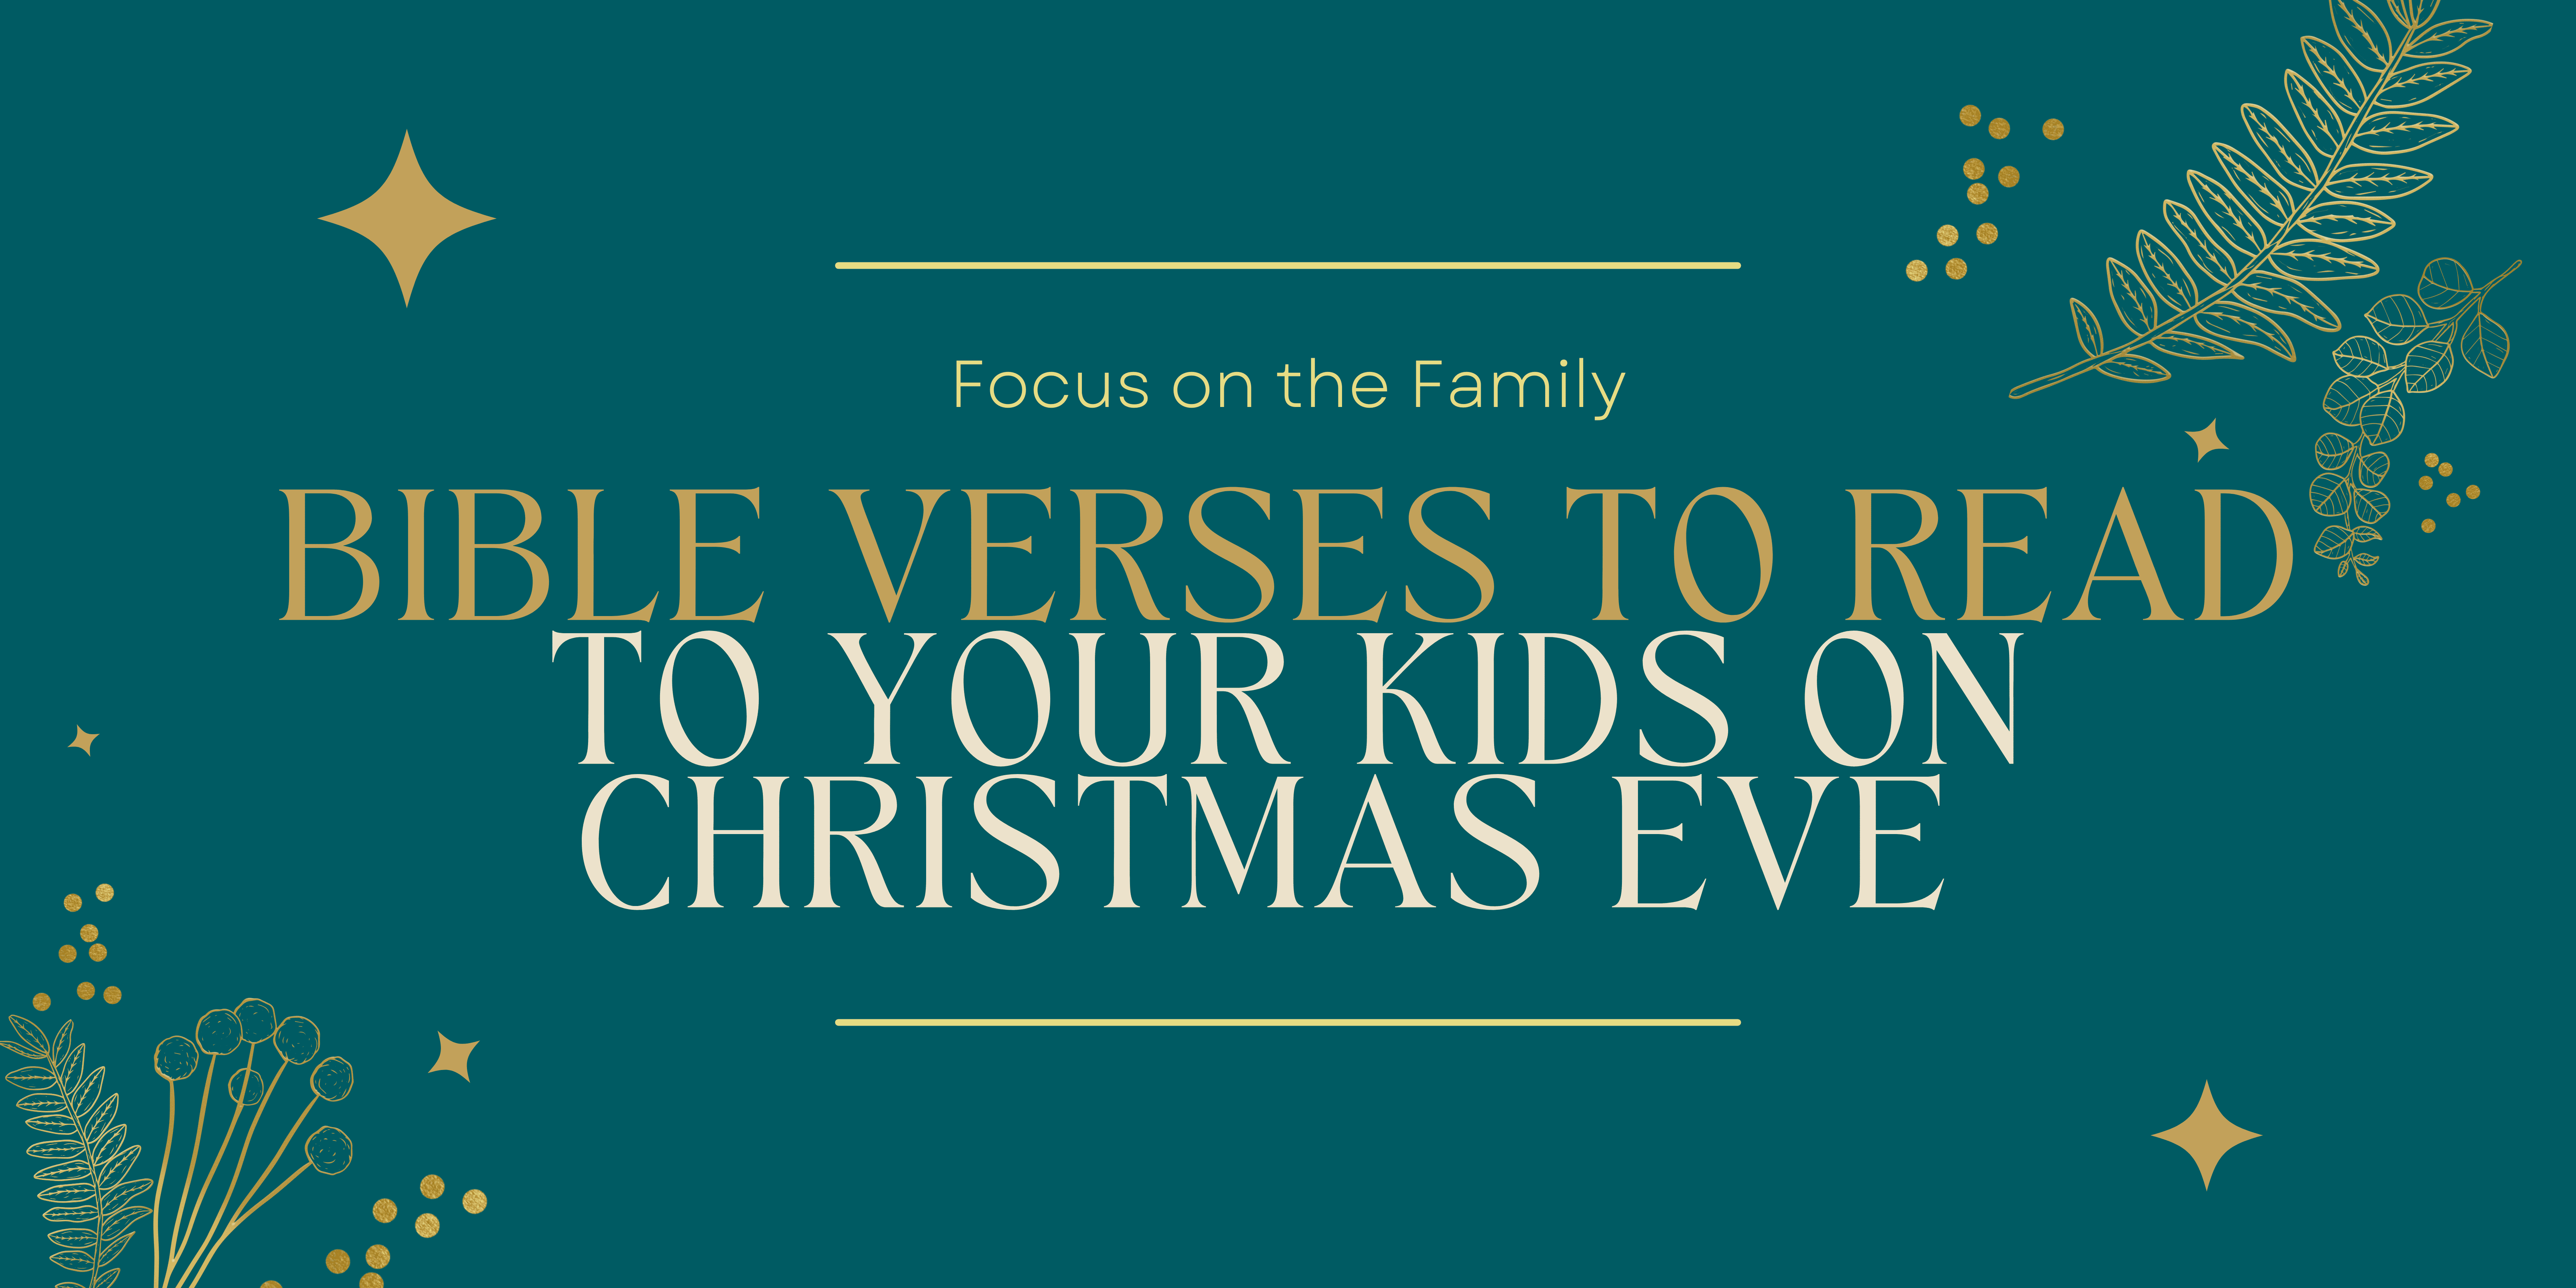 Bible Verses to Read to Your Kids on Christmas Eve - Focus on the Family